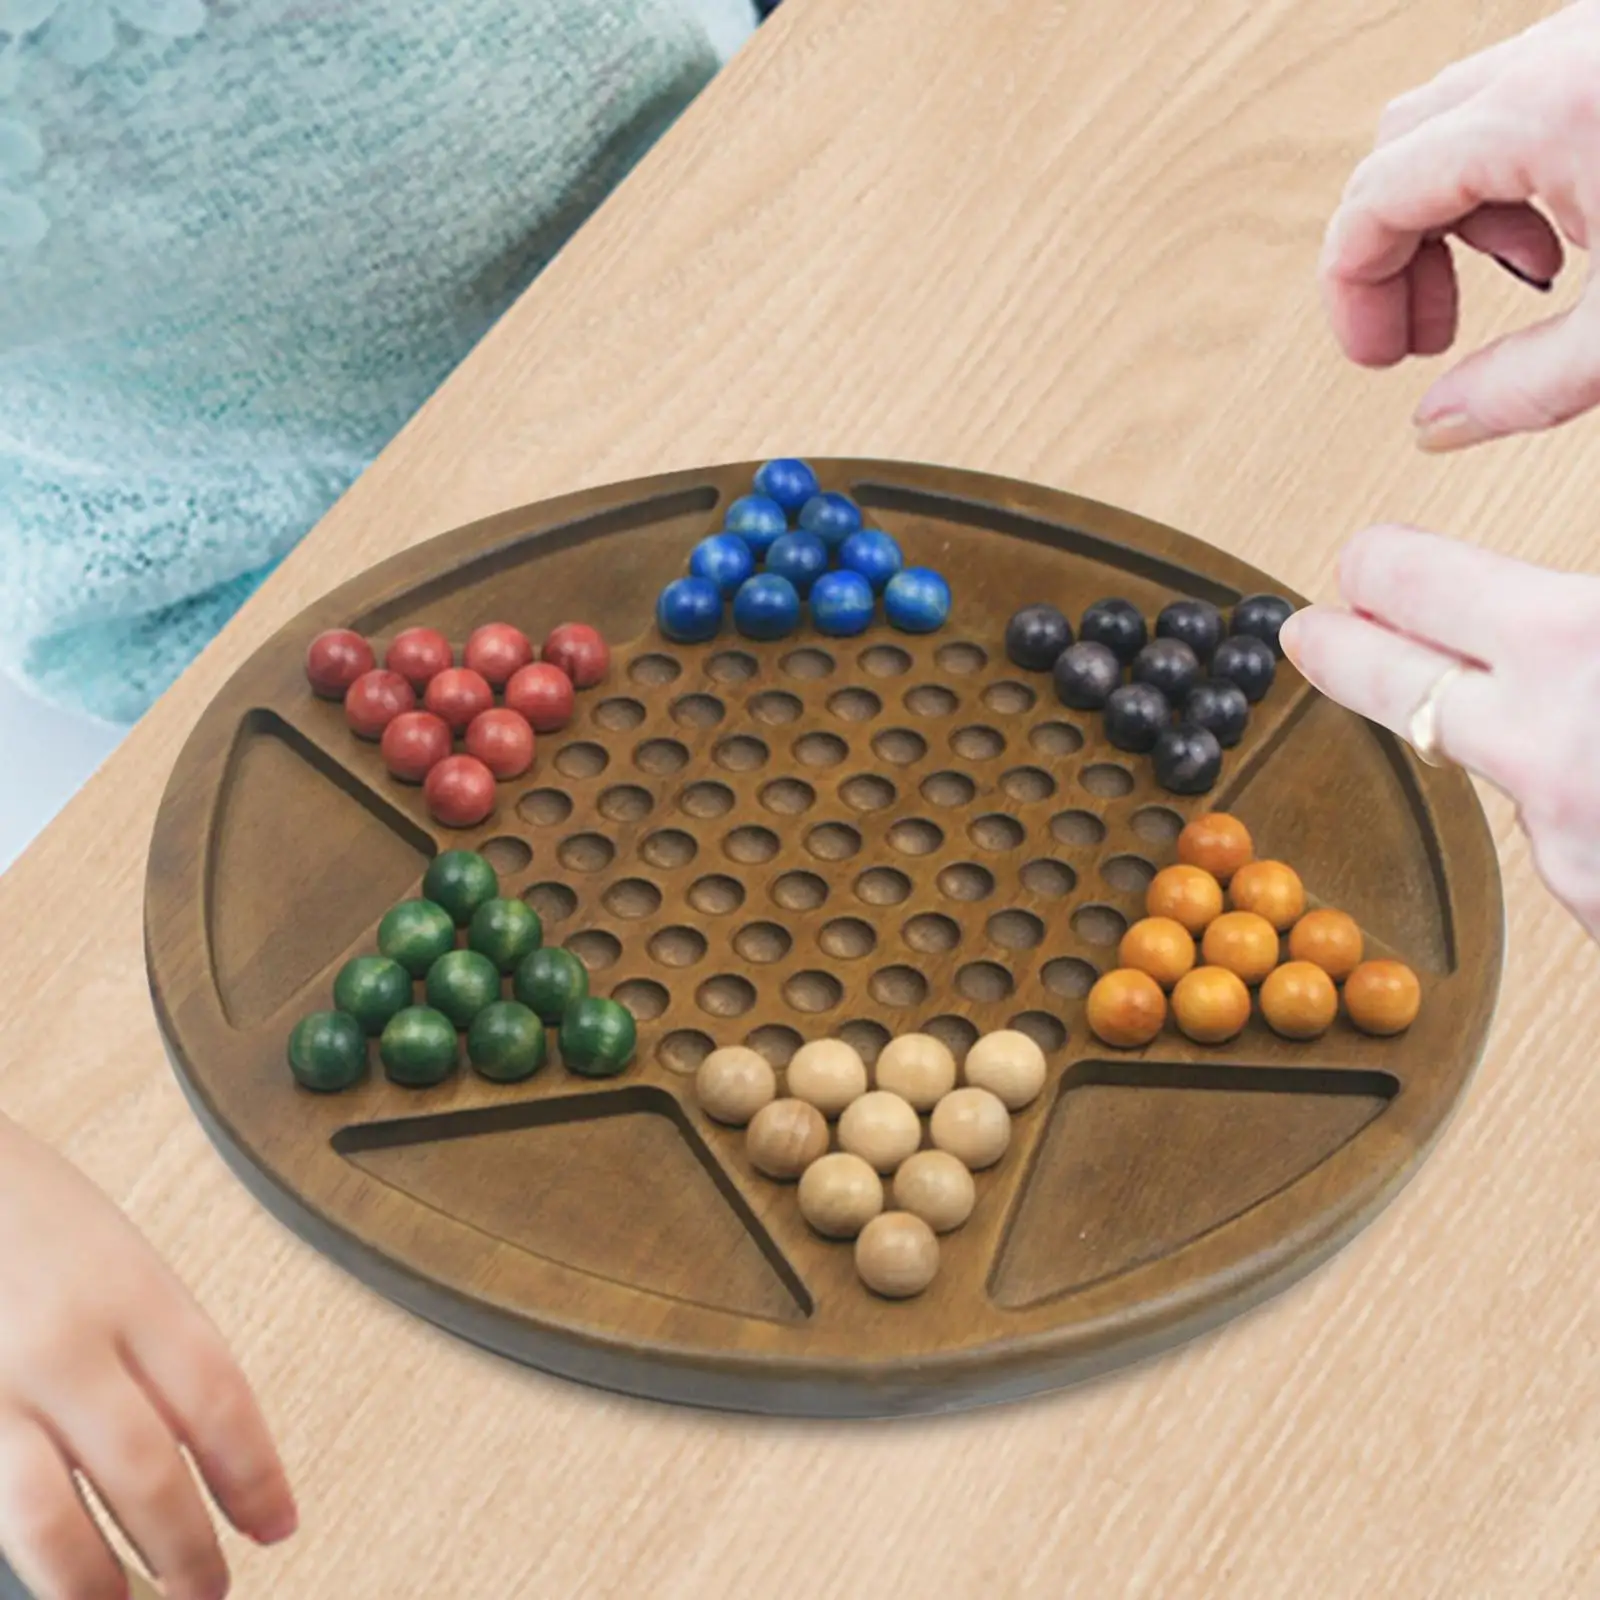 

Chinese Checkers Fun Game Toy for Ages 6+ Handcraft 13.78 Inches Board Games